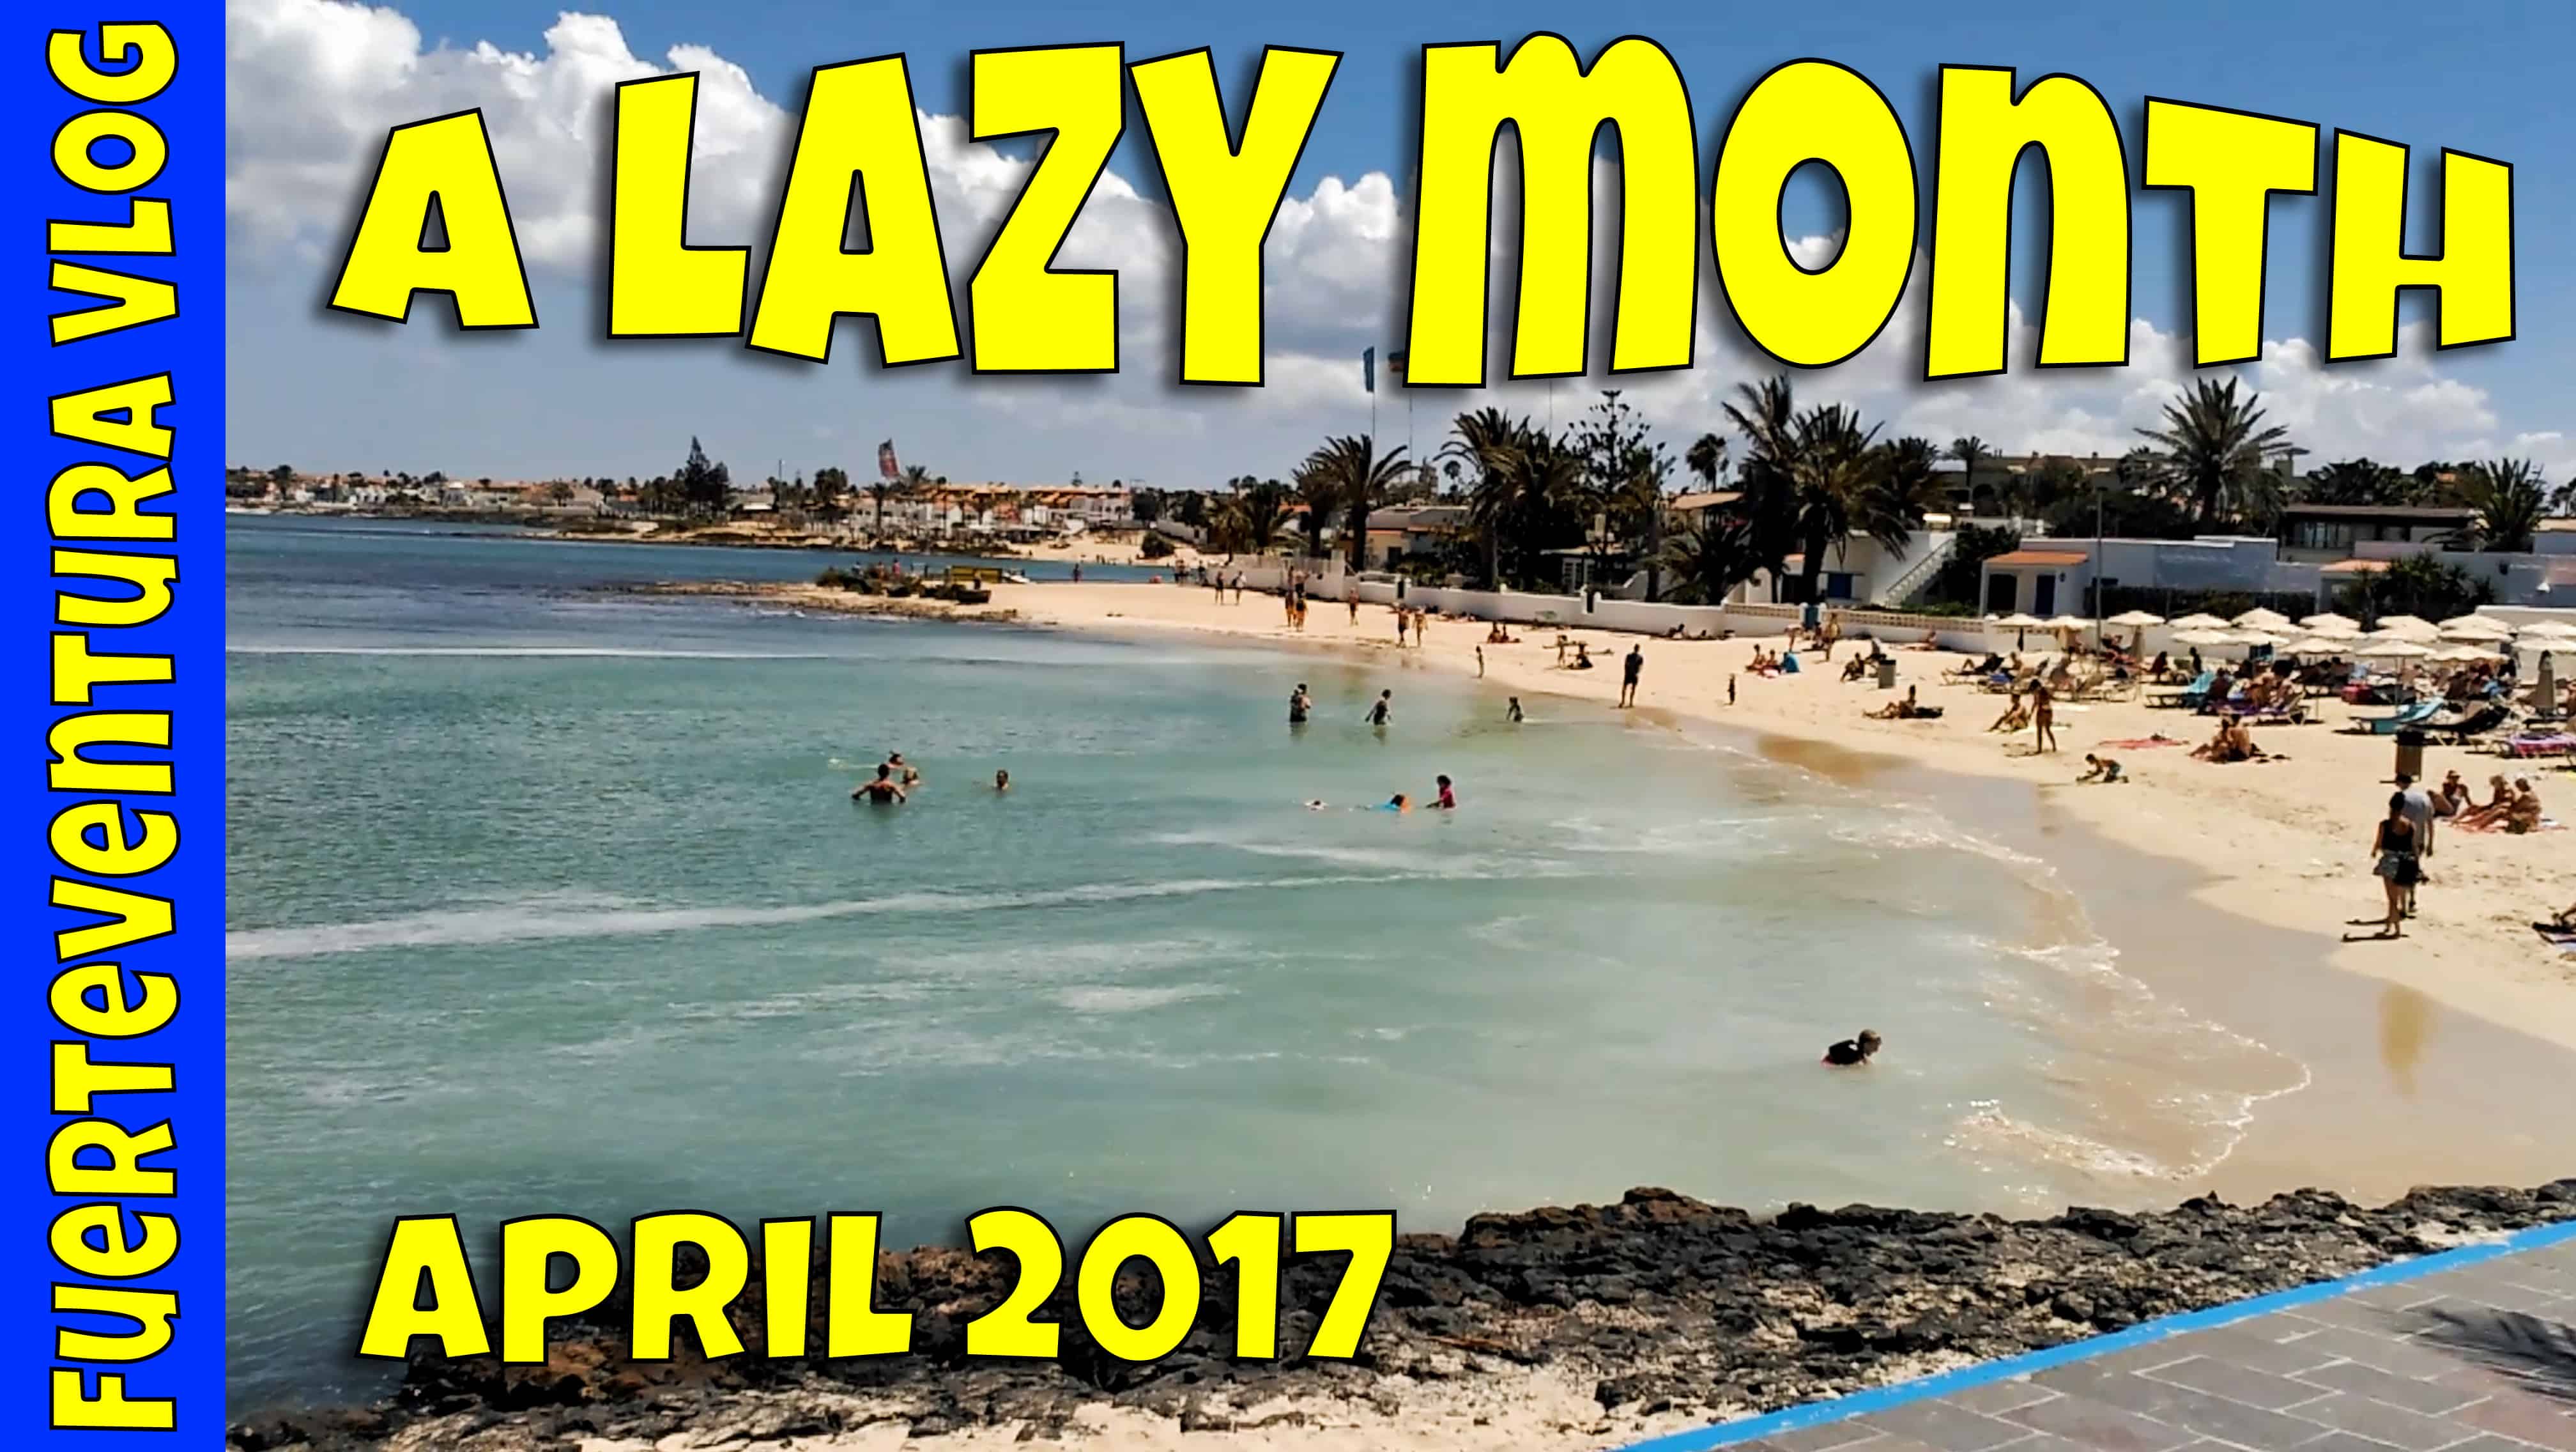 Fuerteventura In April 2017 – A Lazy Month